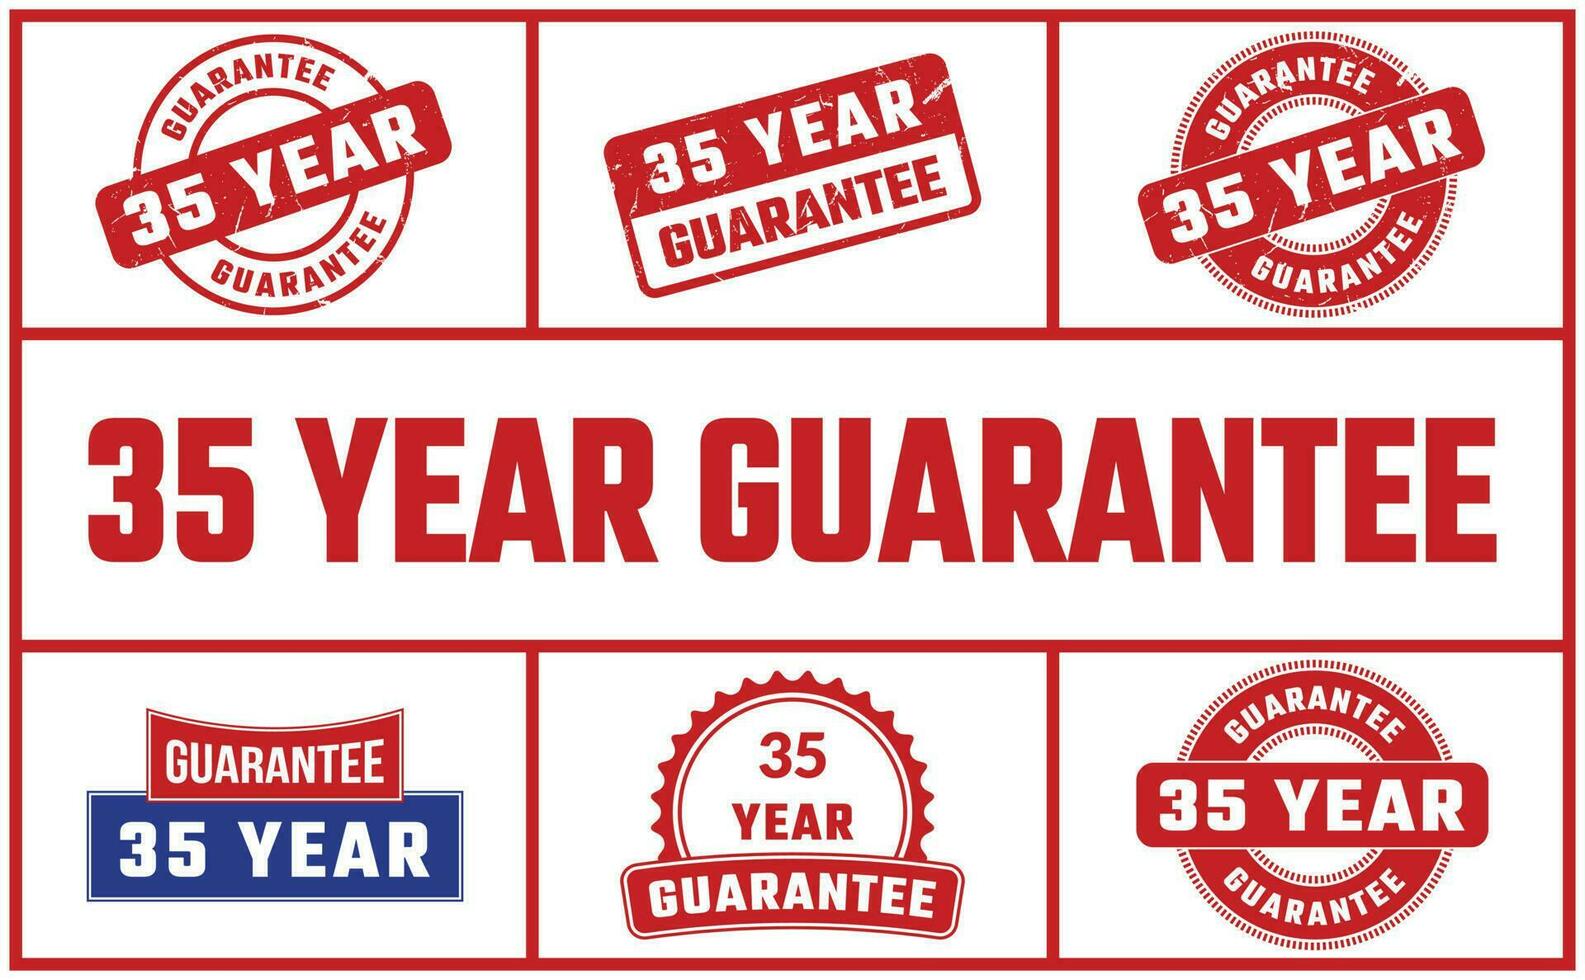 35 Year Guarantee Rubber Stamp Set vector